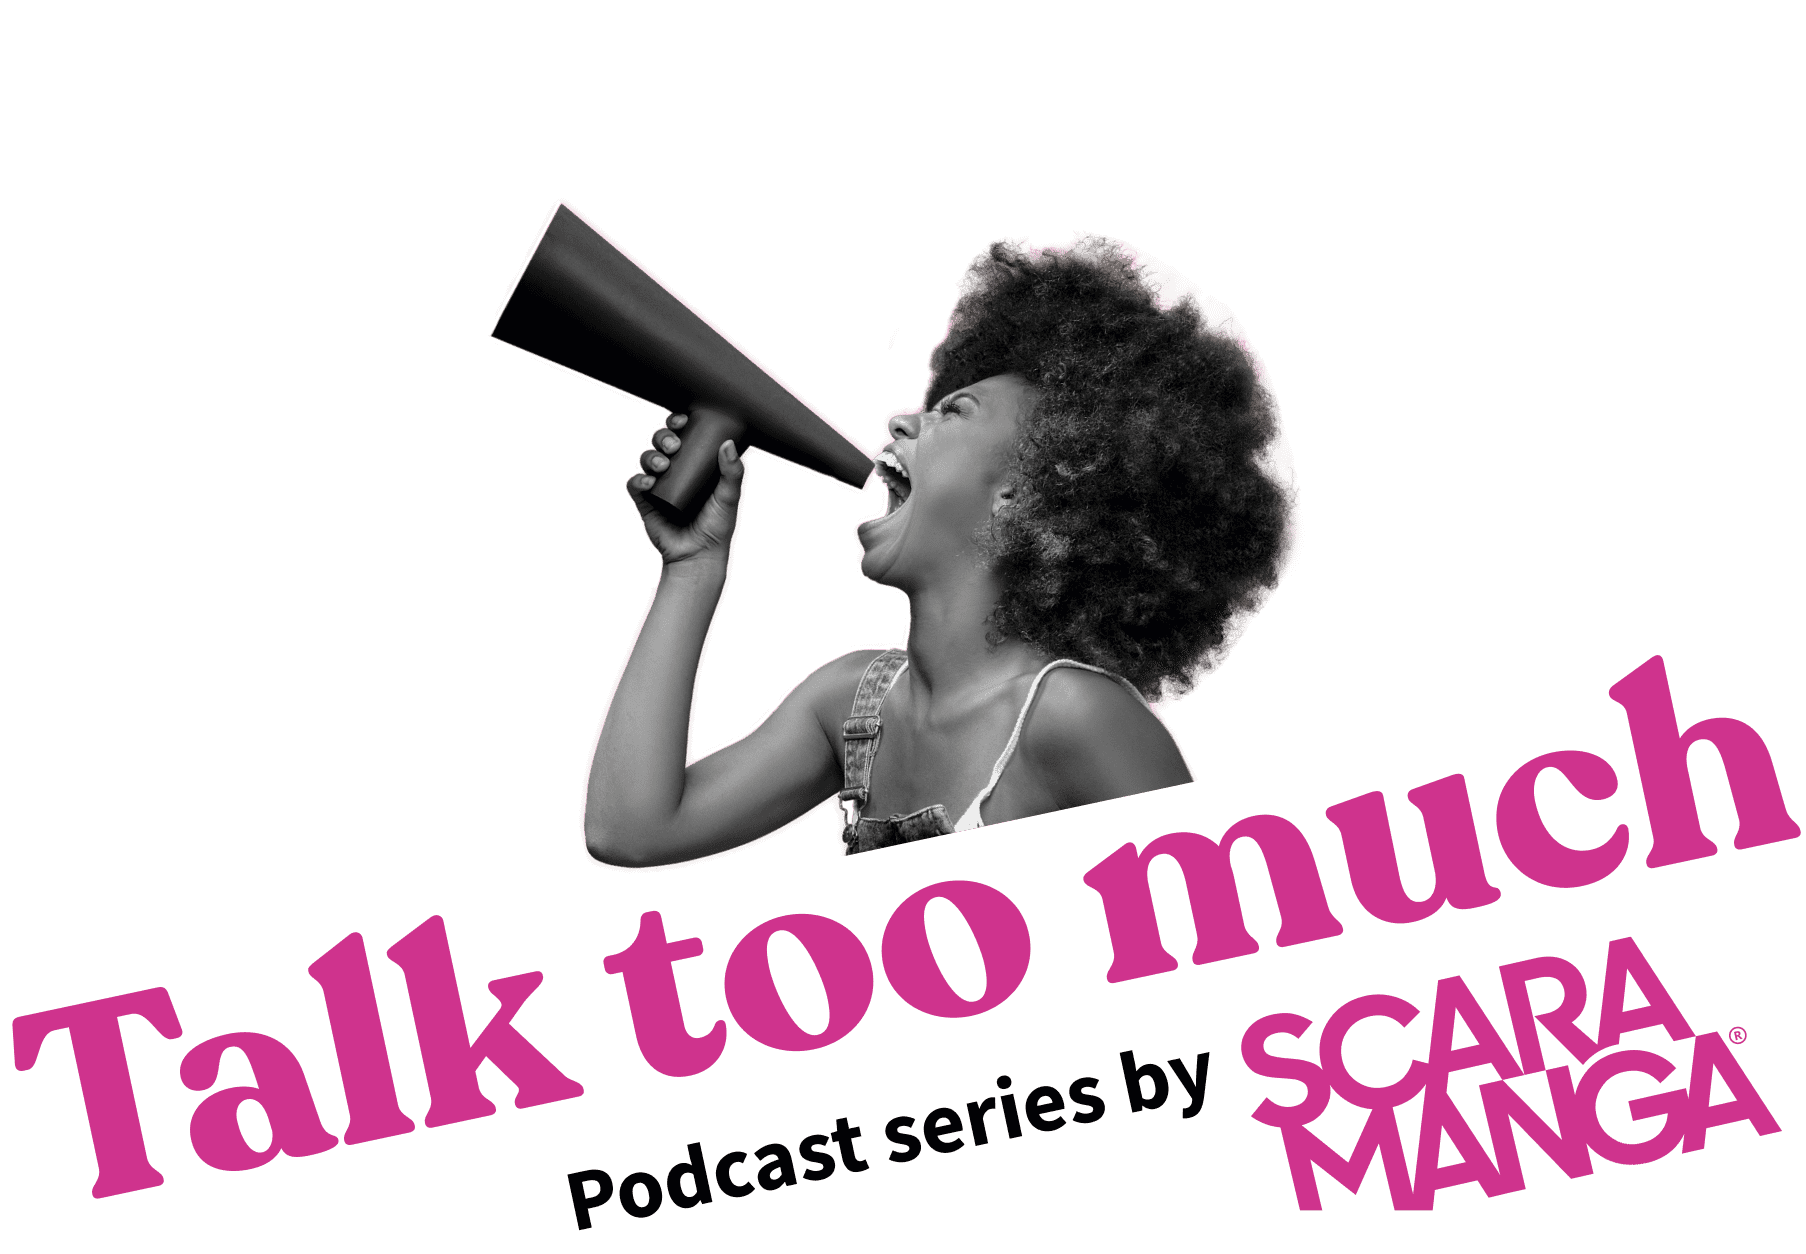 Talk too much: podcast series by Scaramanga